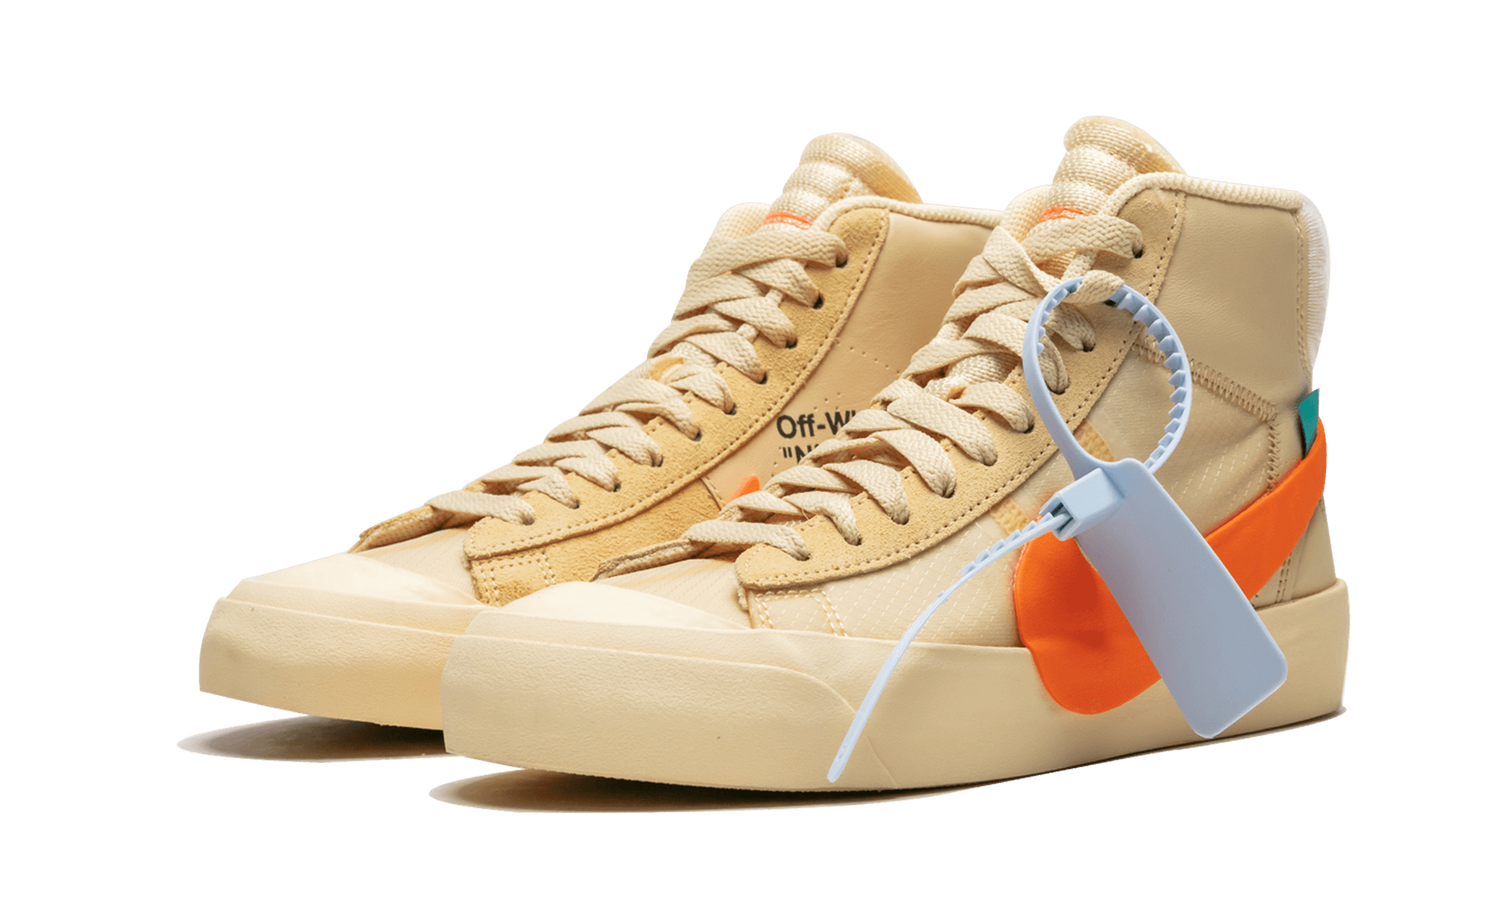 The 10: Nike Blazer Mid “Off-White - All Hallows Eve” - AA3832 700 | Grailshop